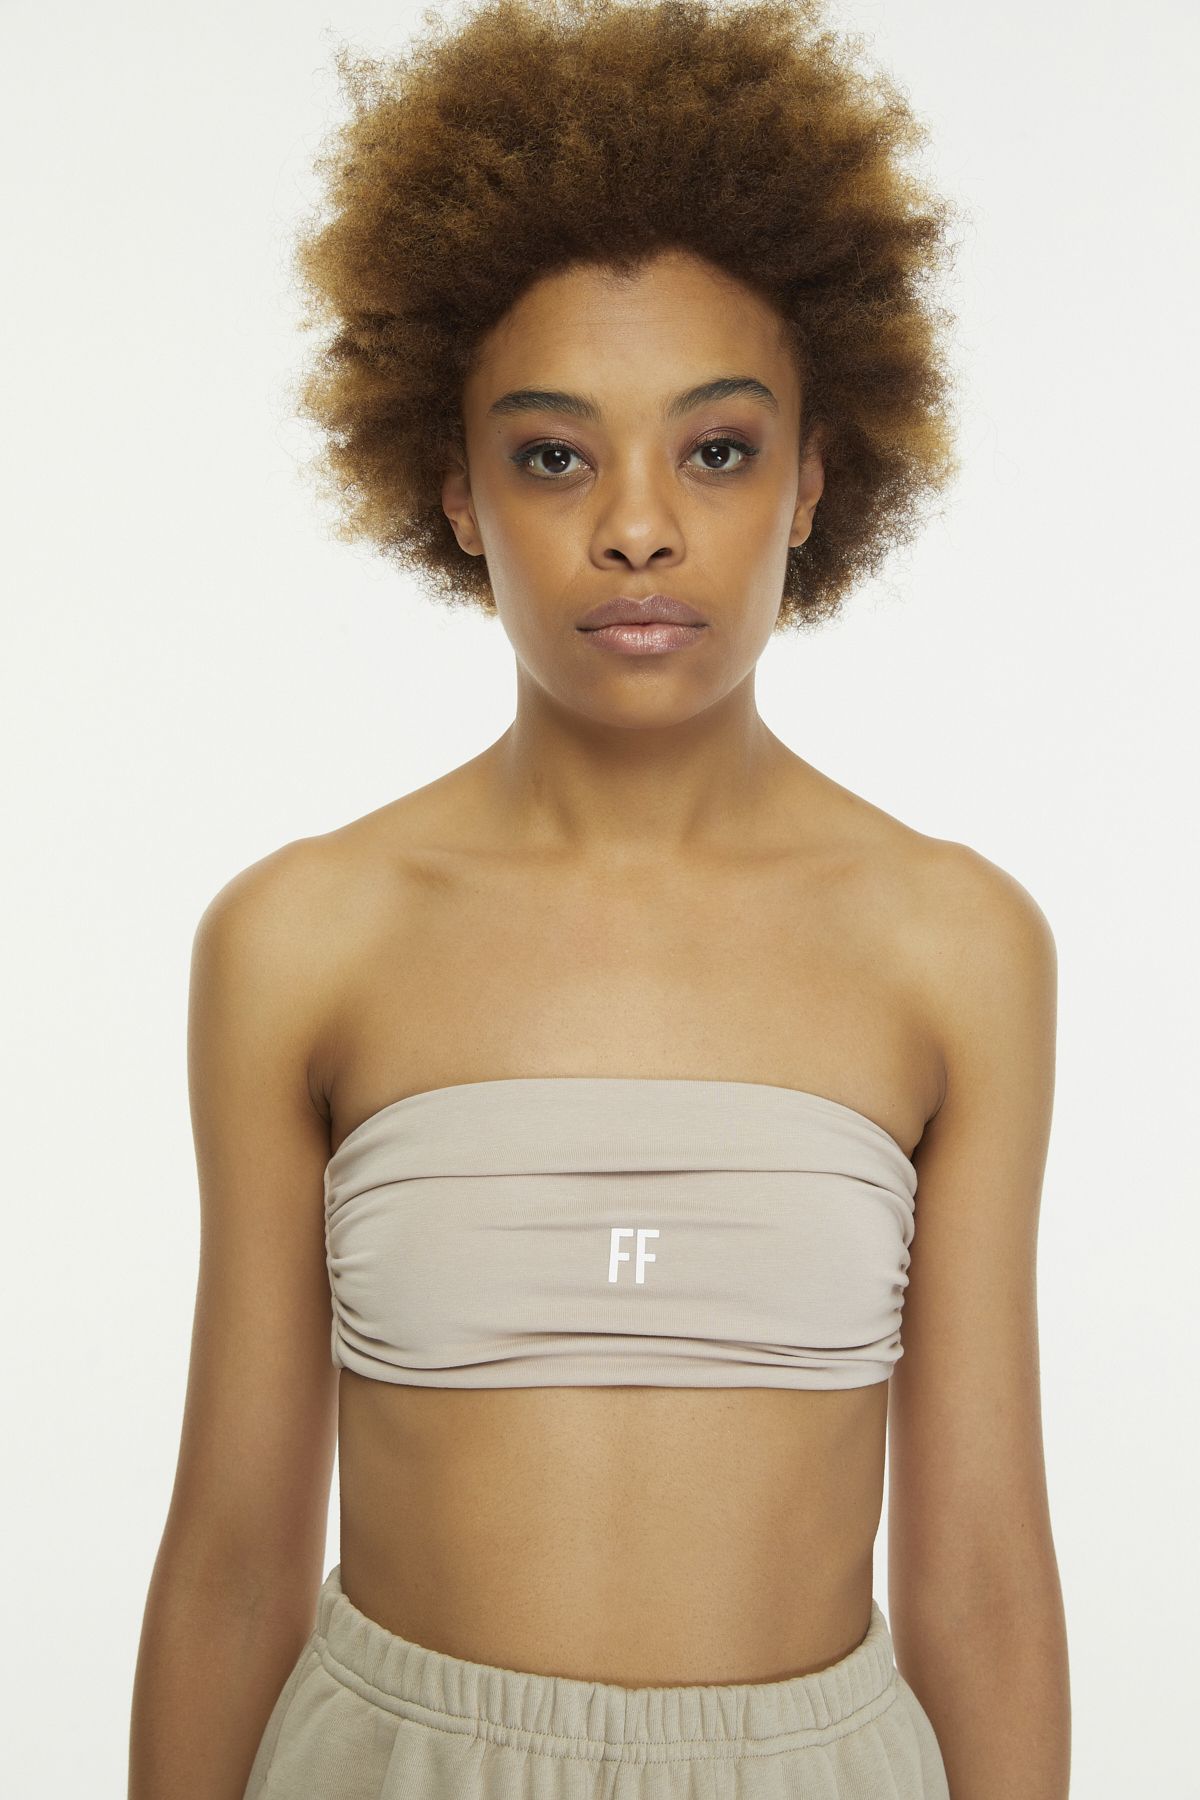 For Fun Ff / Bandeau Top